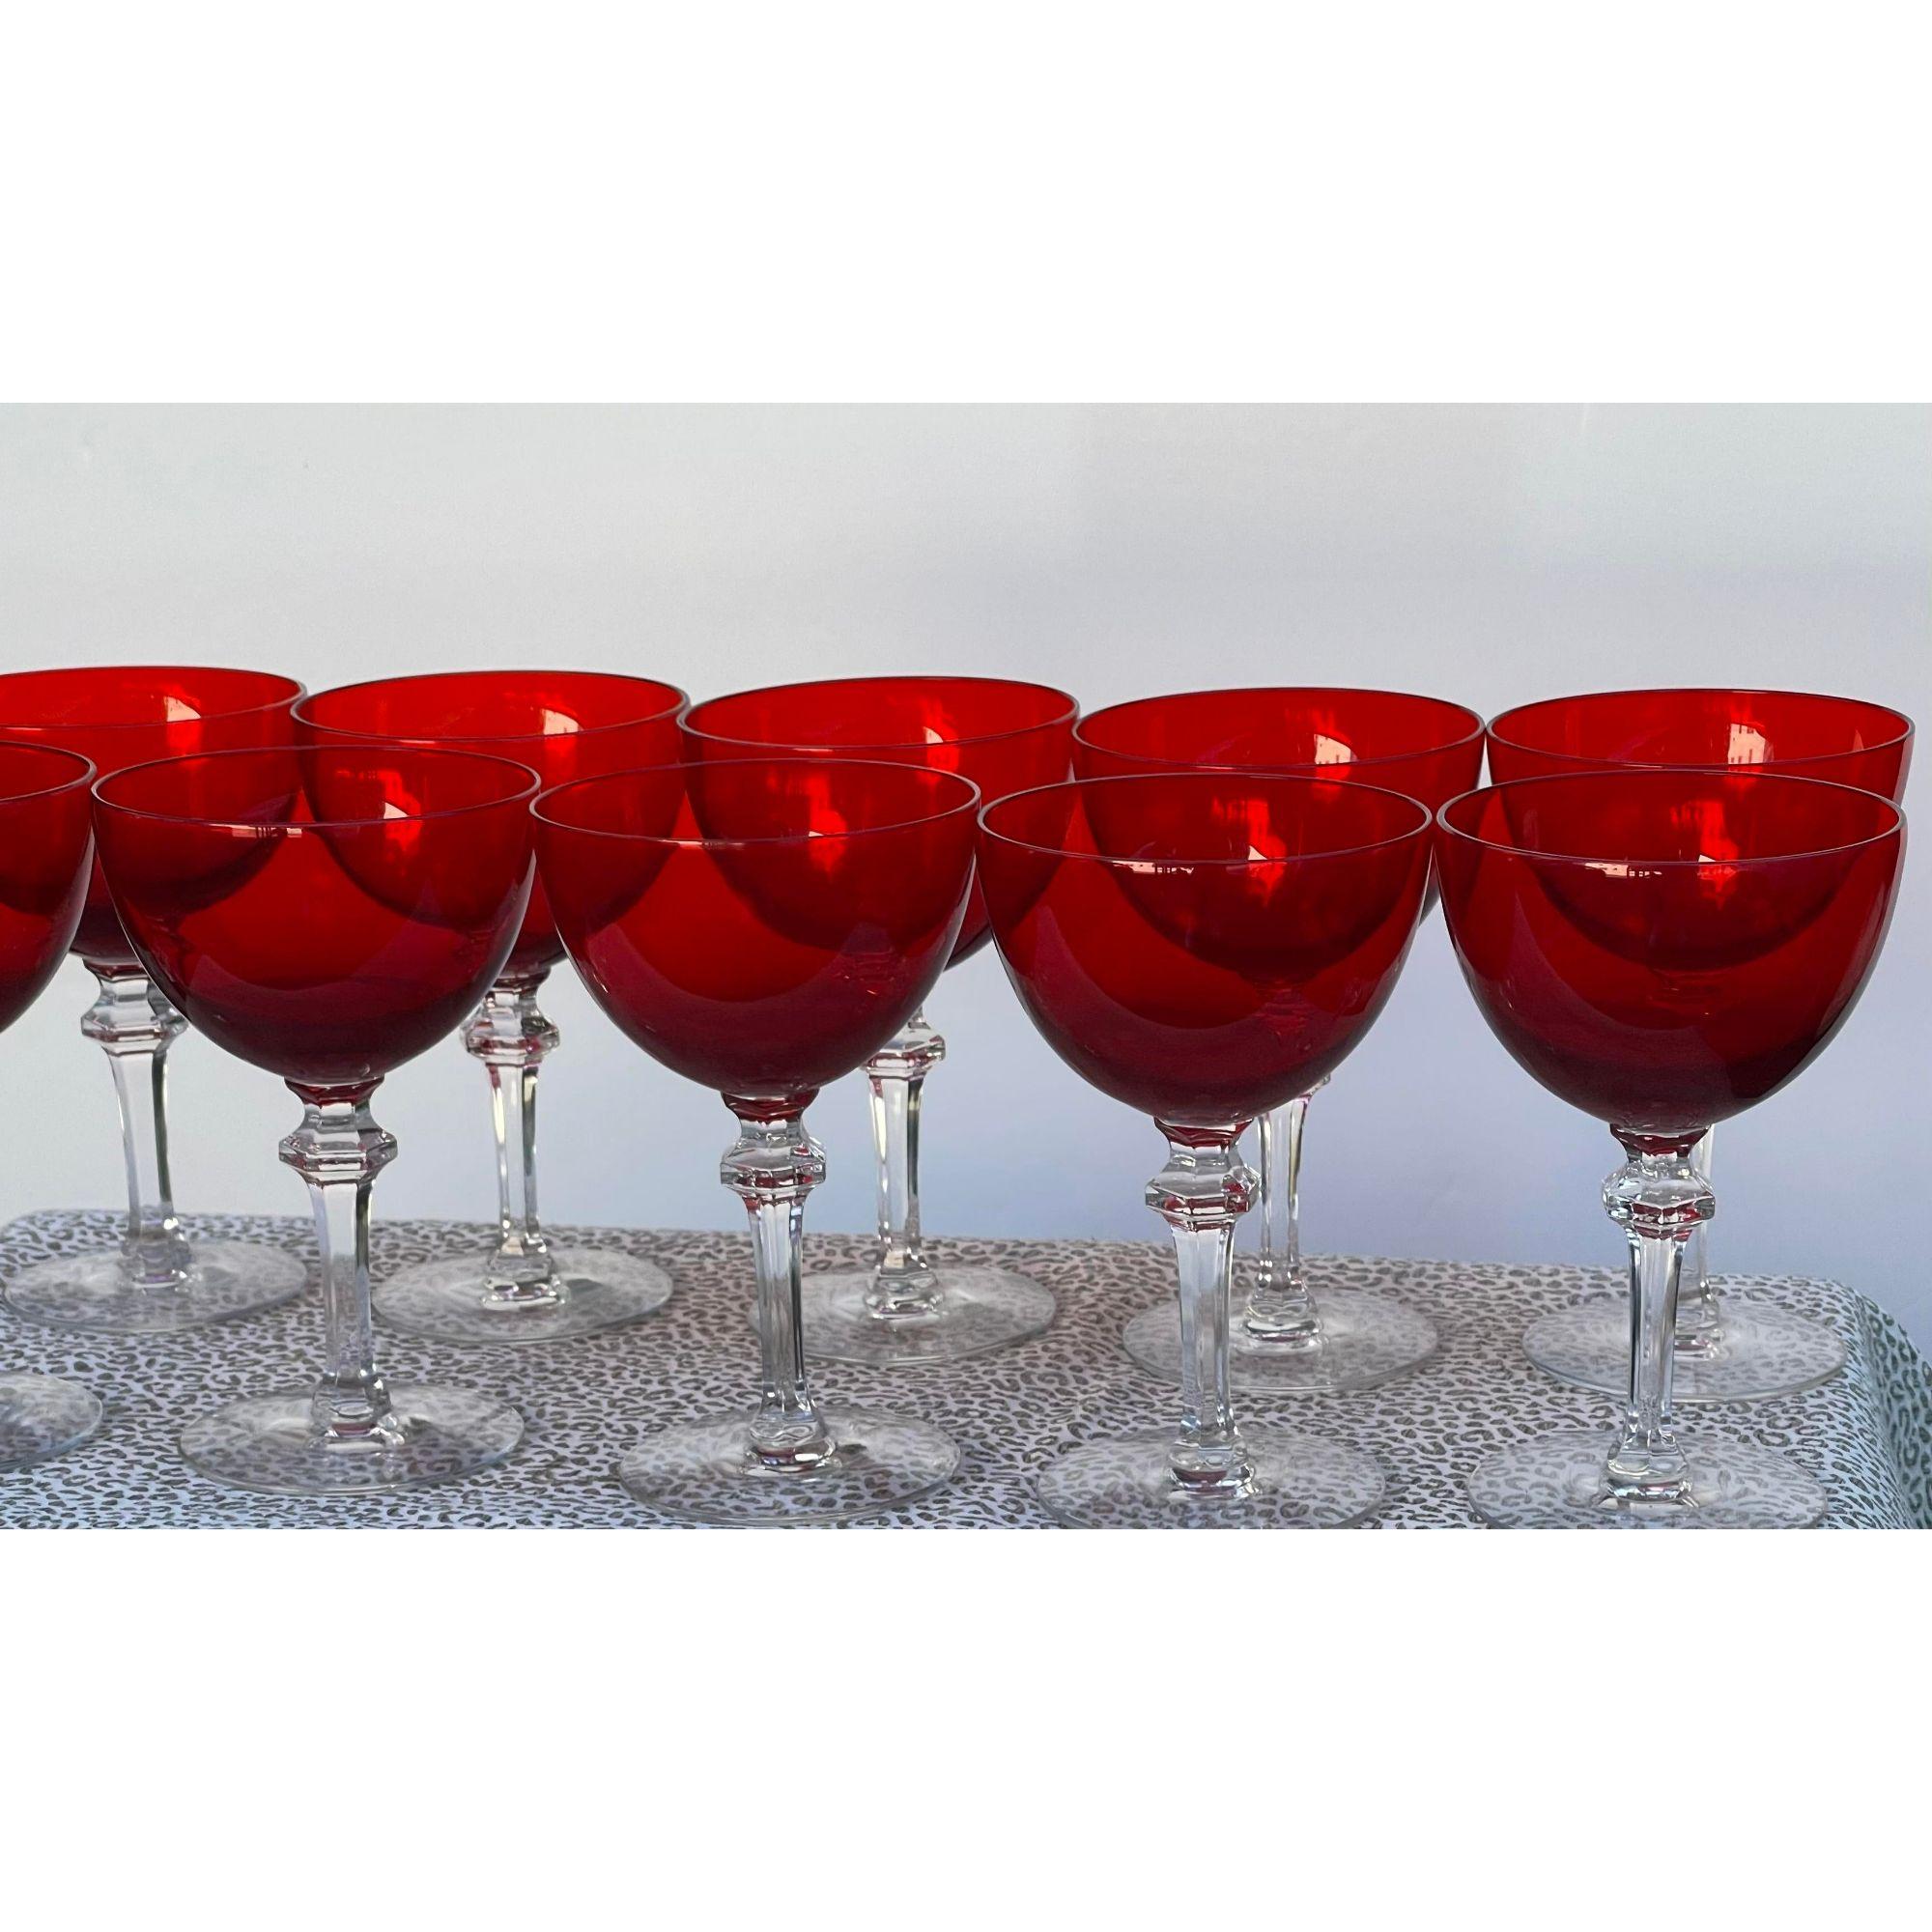 20th Century Set of 10 Art Deco Morgantown Red Wine Glasses Champagne Stems, 1930s For Sale